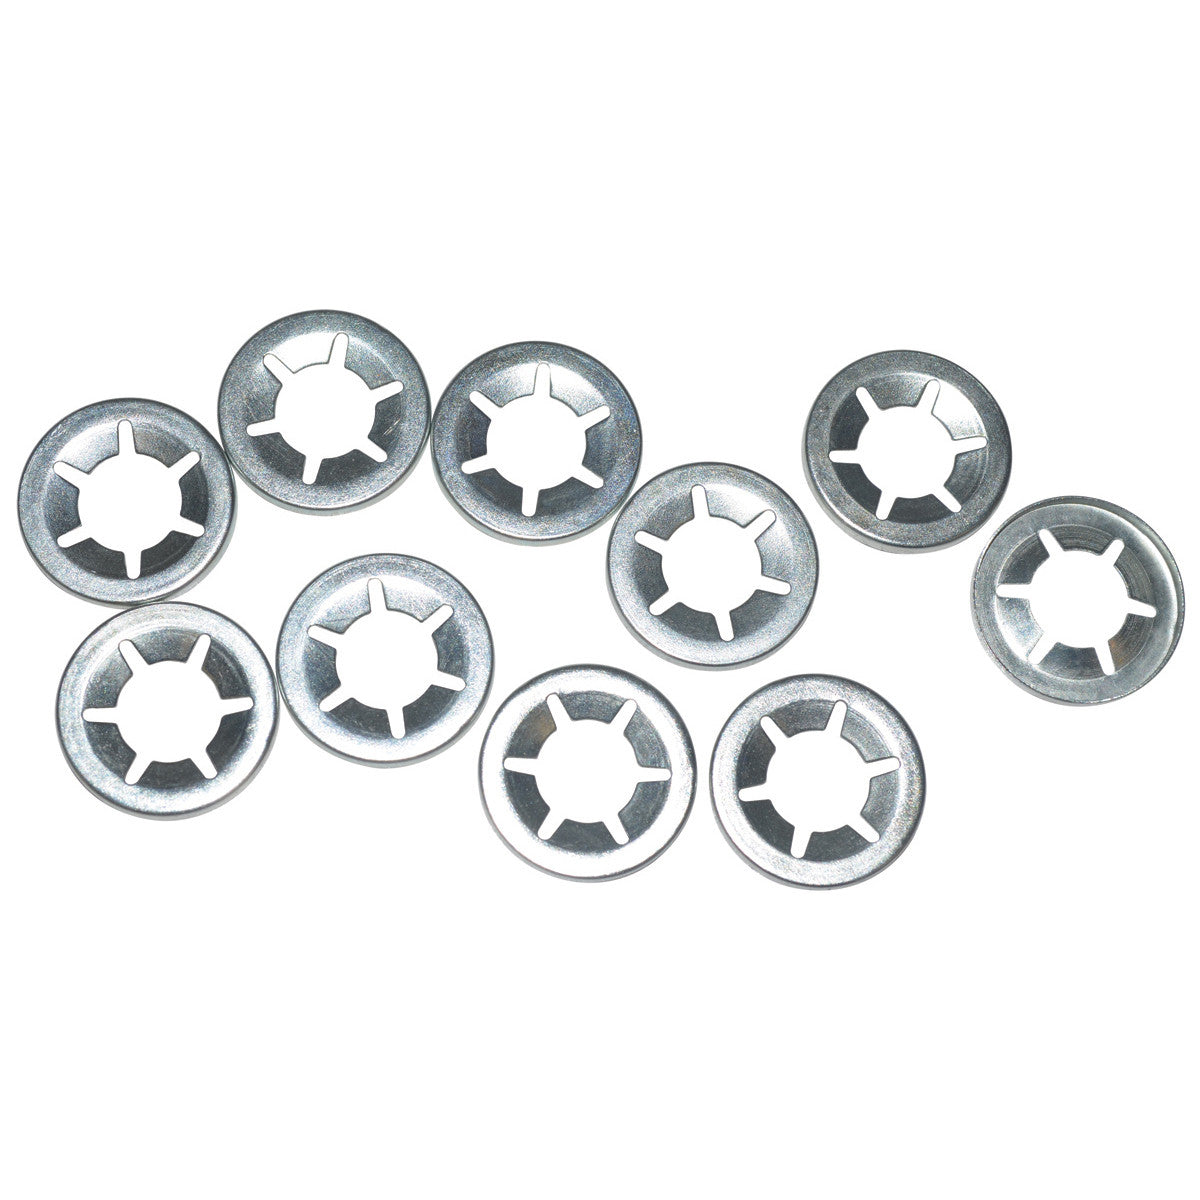 Rover/Masport/Morrison Axle Retaining Washer Clips Set of (10) A03092